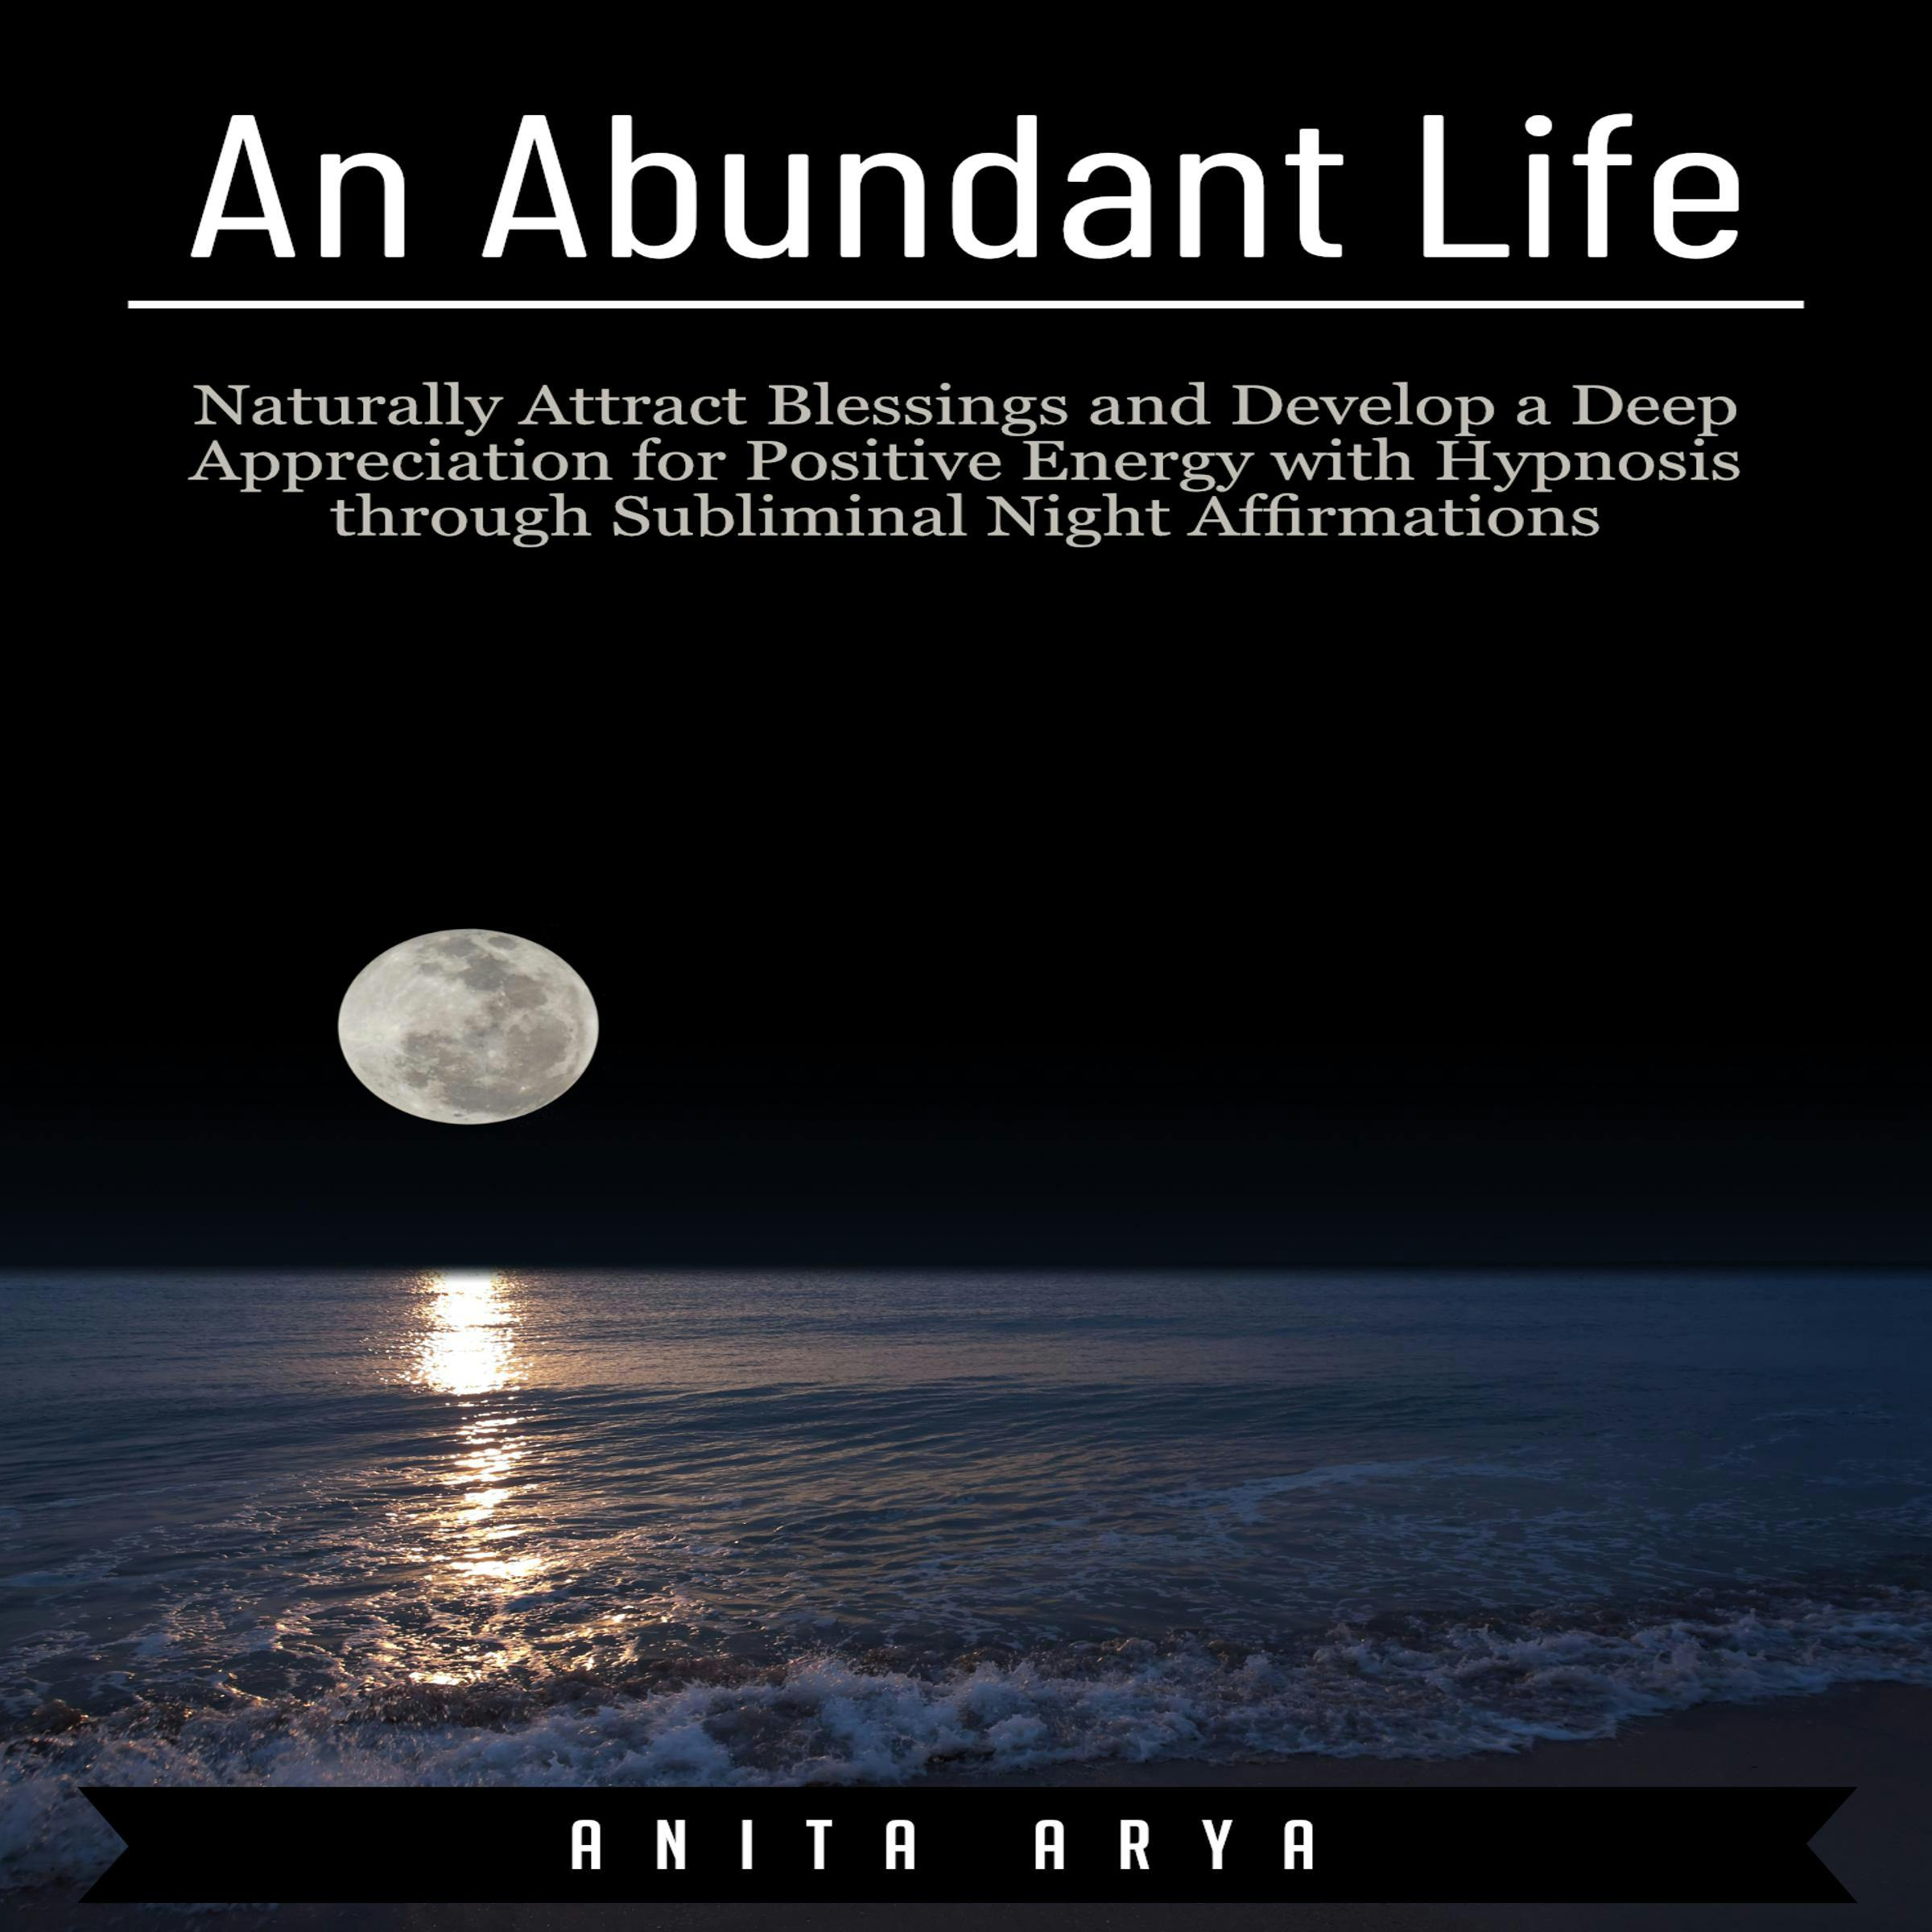 An Abundant Life: Naturally Attract Blessings and Develop a Deep Appreciation for Positive Energy with Hypnosis through Subliminal Night Affirmations - Anita Arya